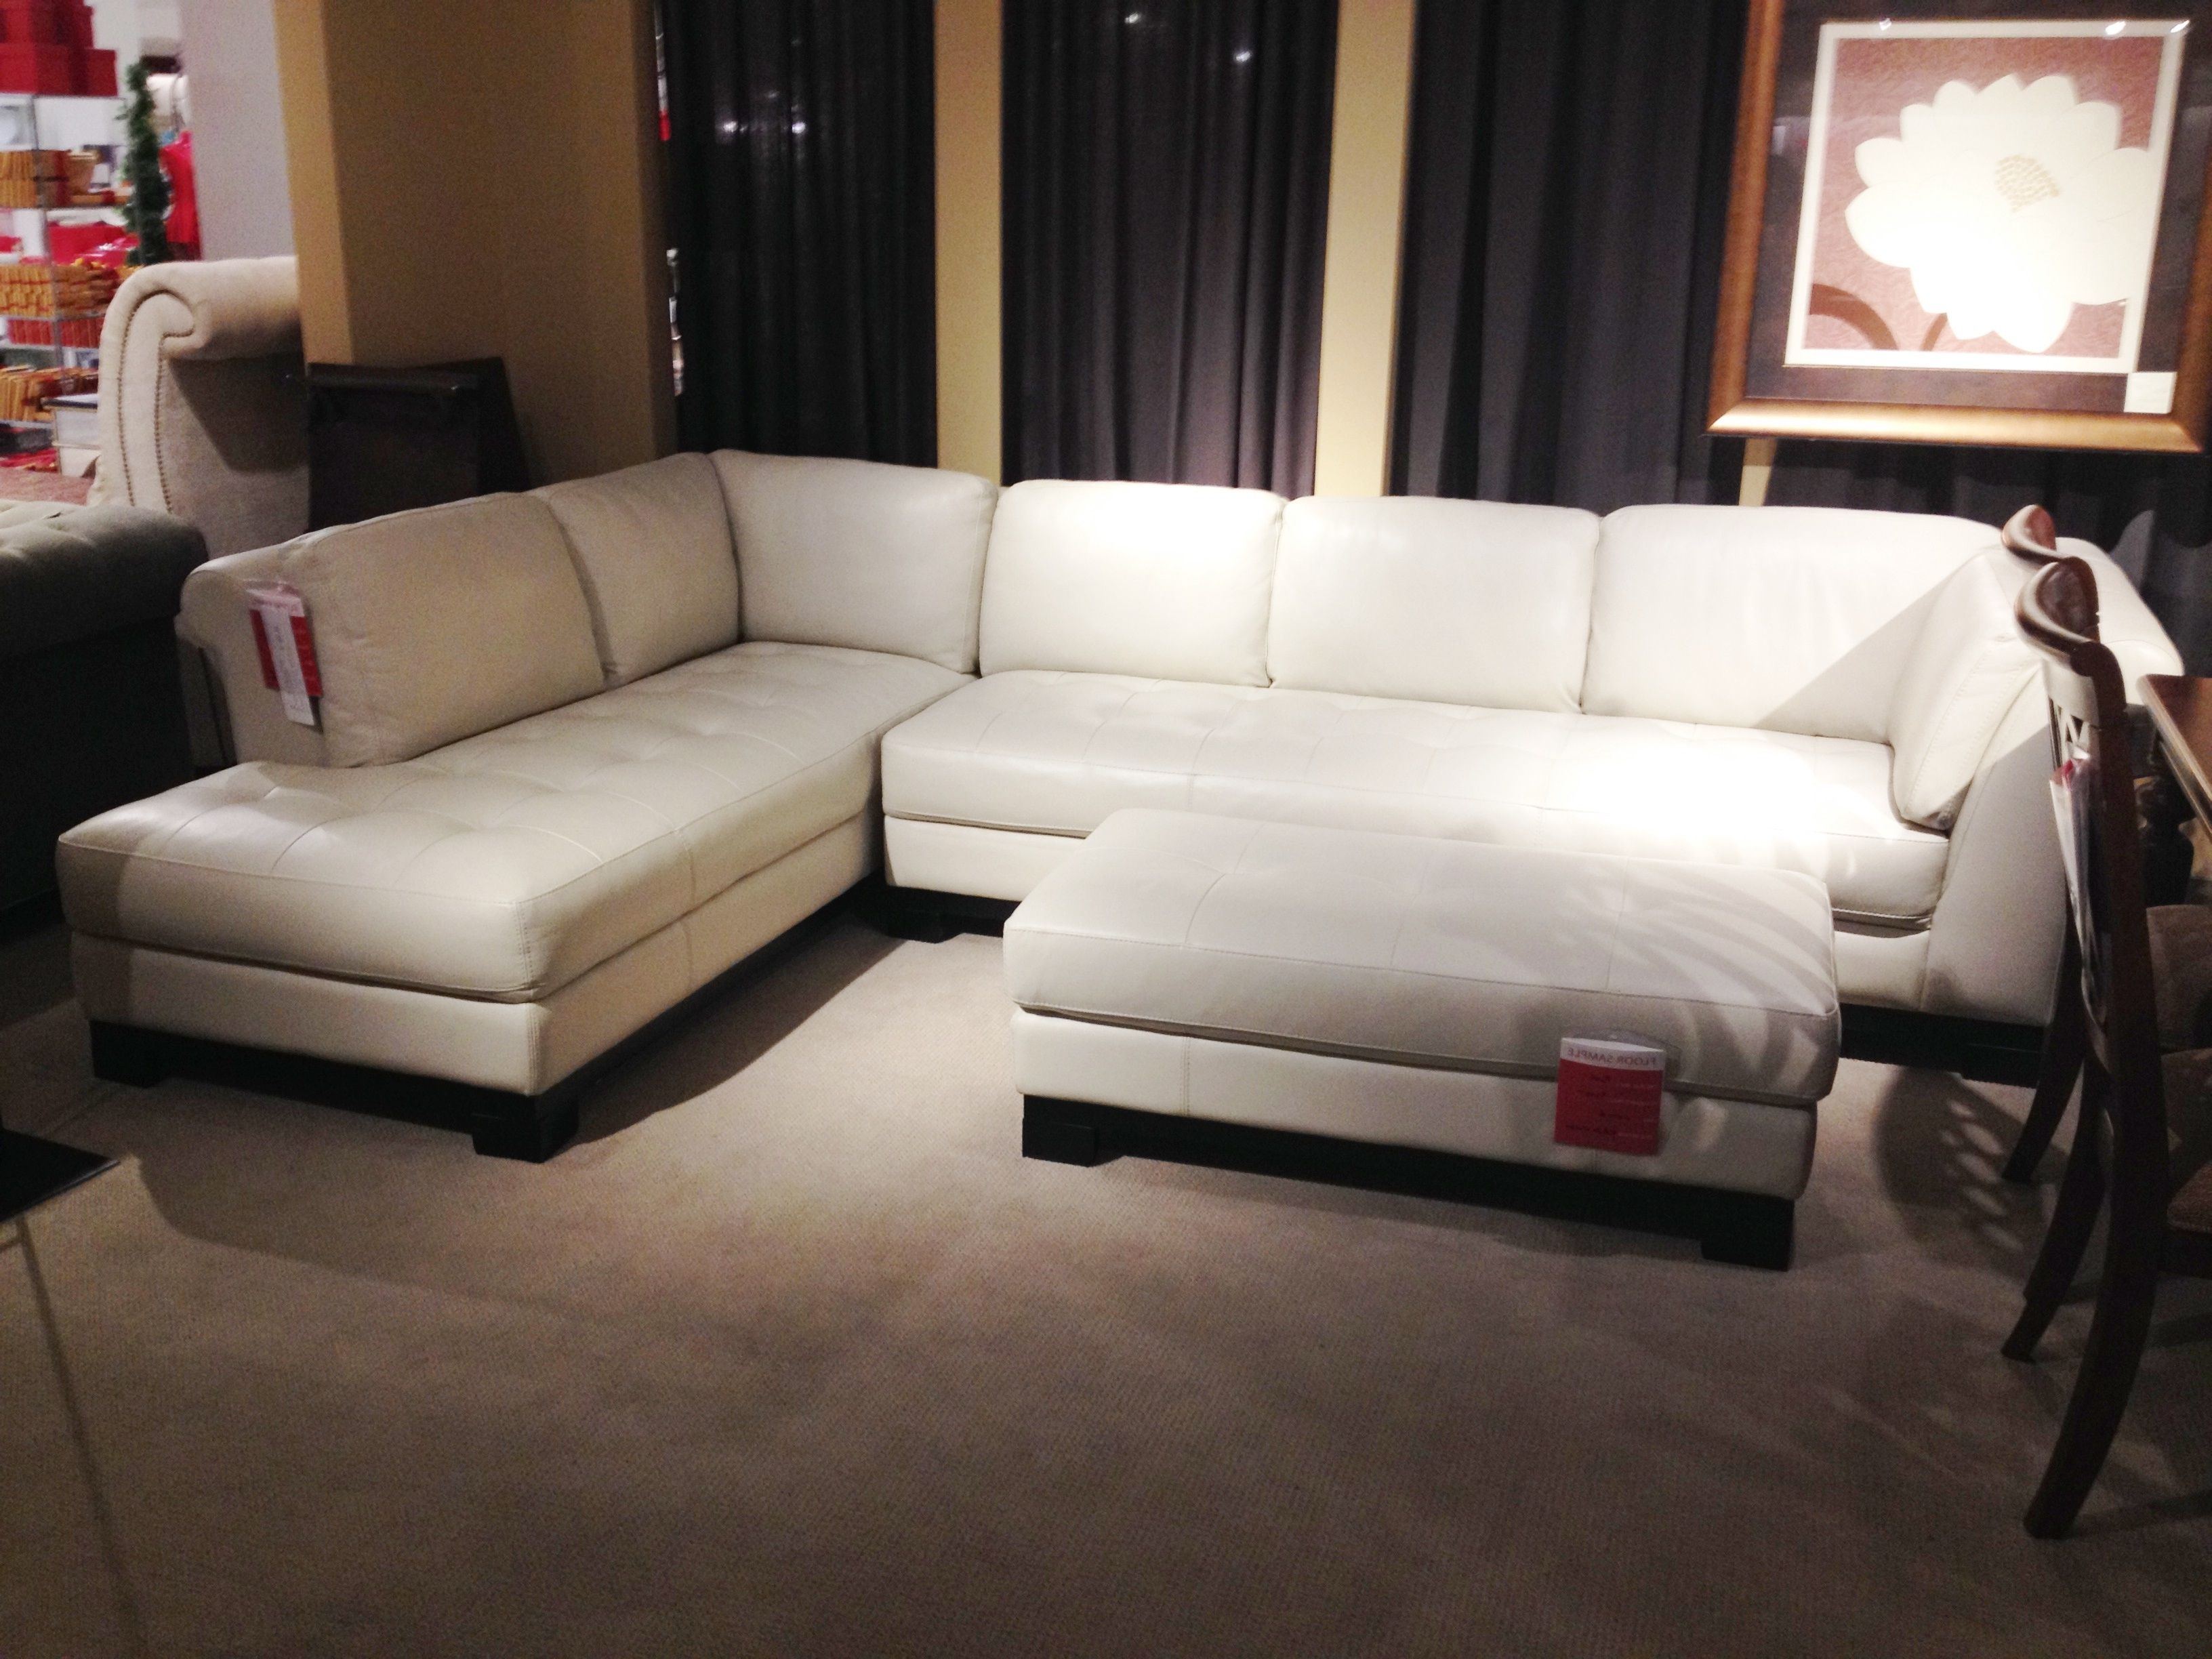 Fashionable Value City Sectional Sofa With Regard To Elegant Living Ideas For Value City Sectional Sofas (View 4 of 15)